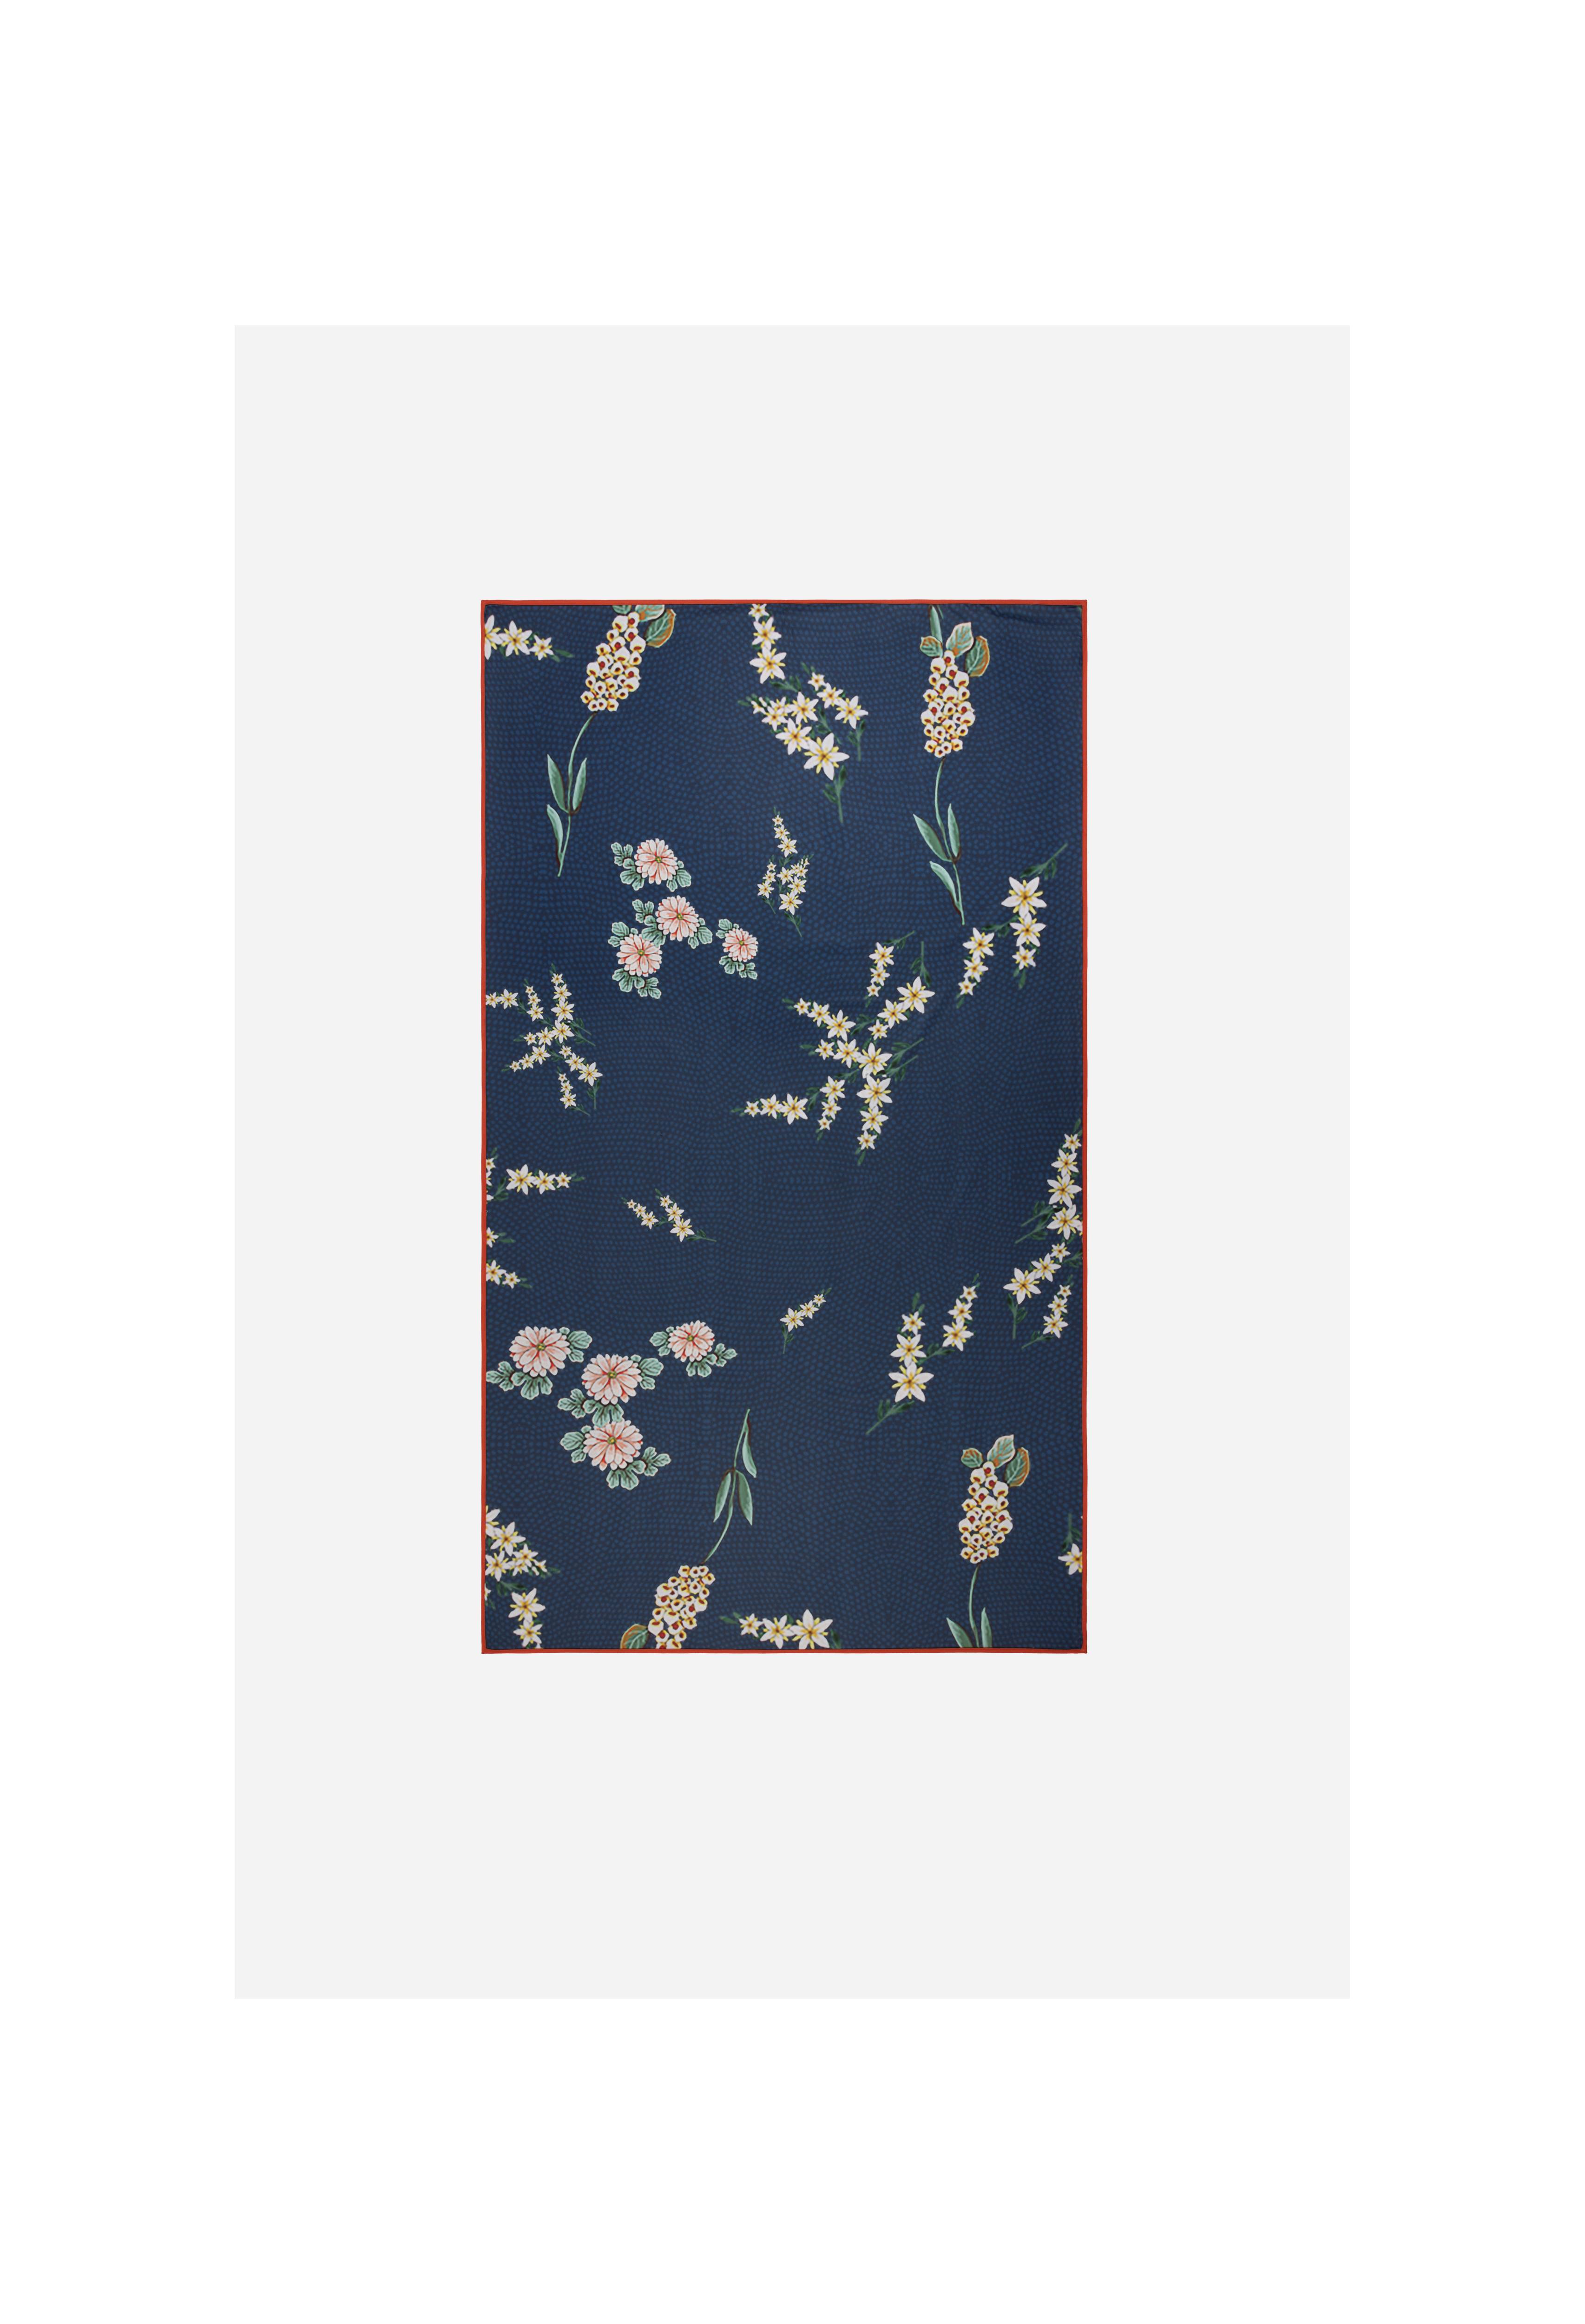 Mia Floral Border Beach Towel, , large image number 3